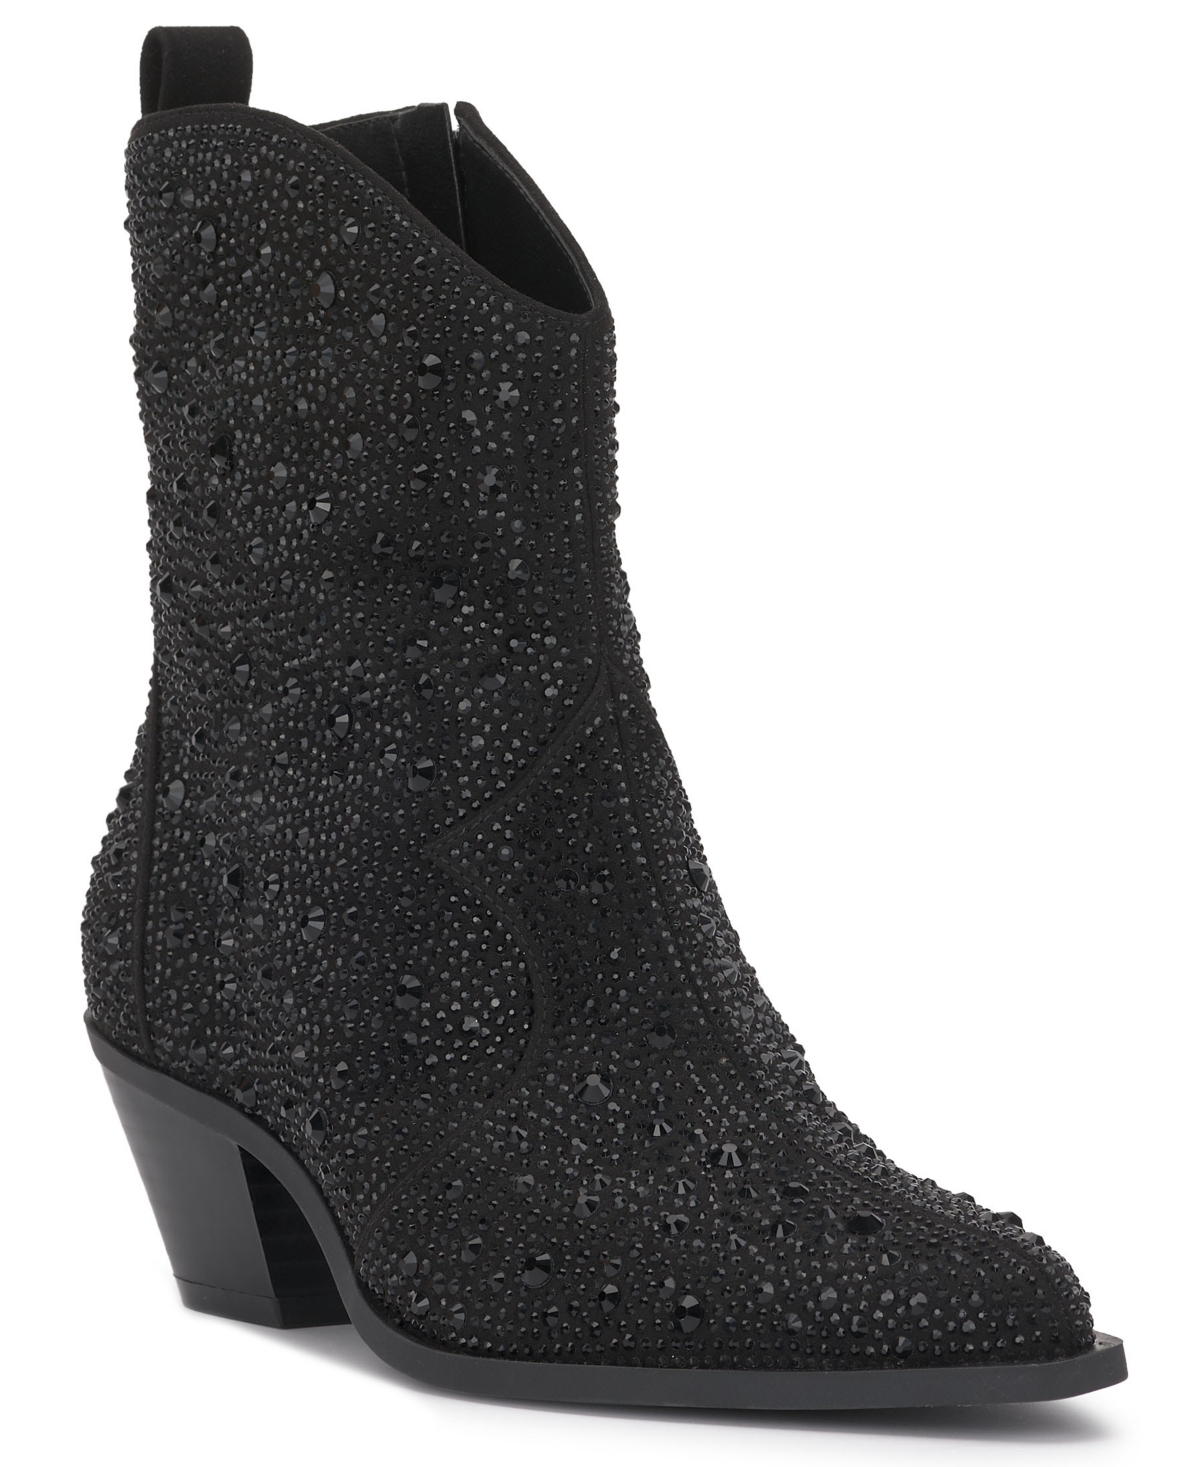 Jessica Simpson Oviedo 2 Embellished Booties In Black Faux Suede